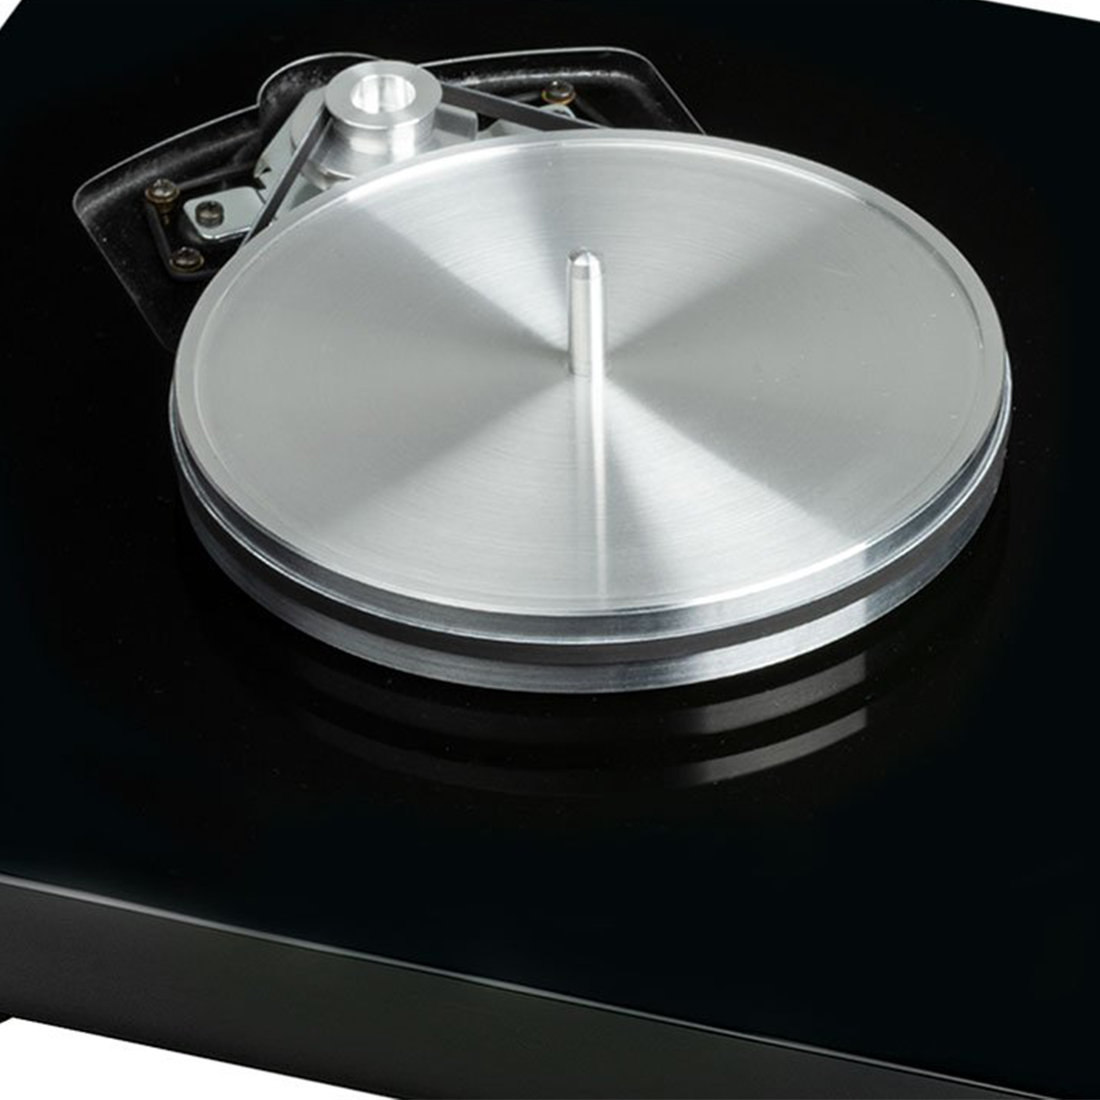 Pro-Ject Debut Sub-platter Upgrade